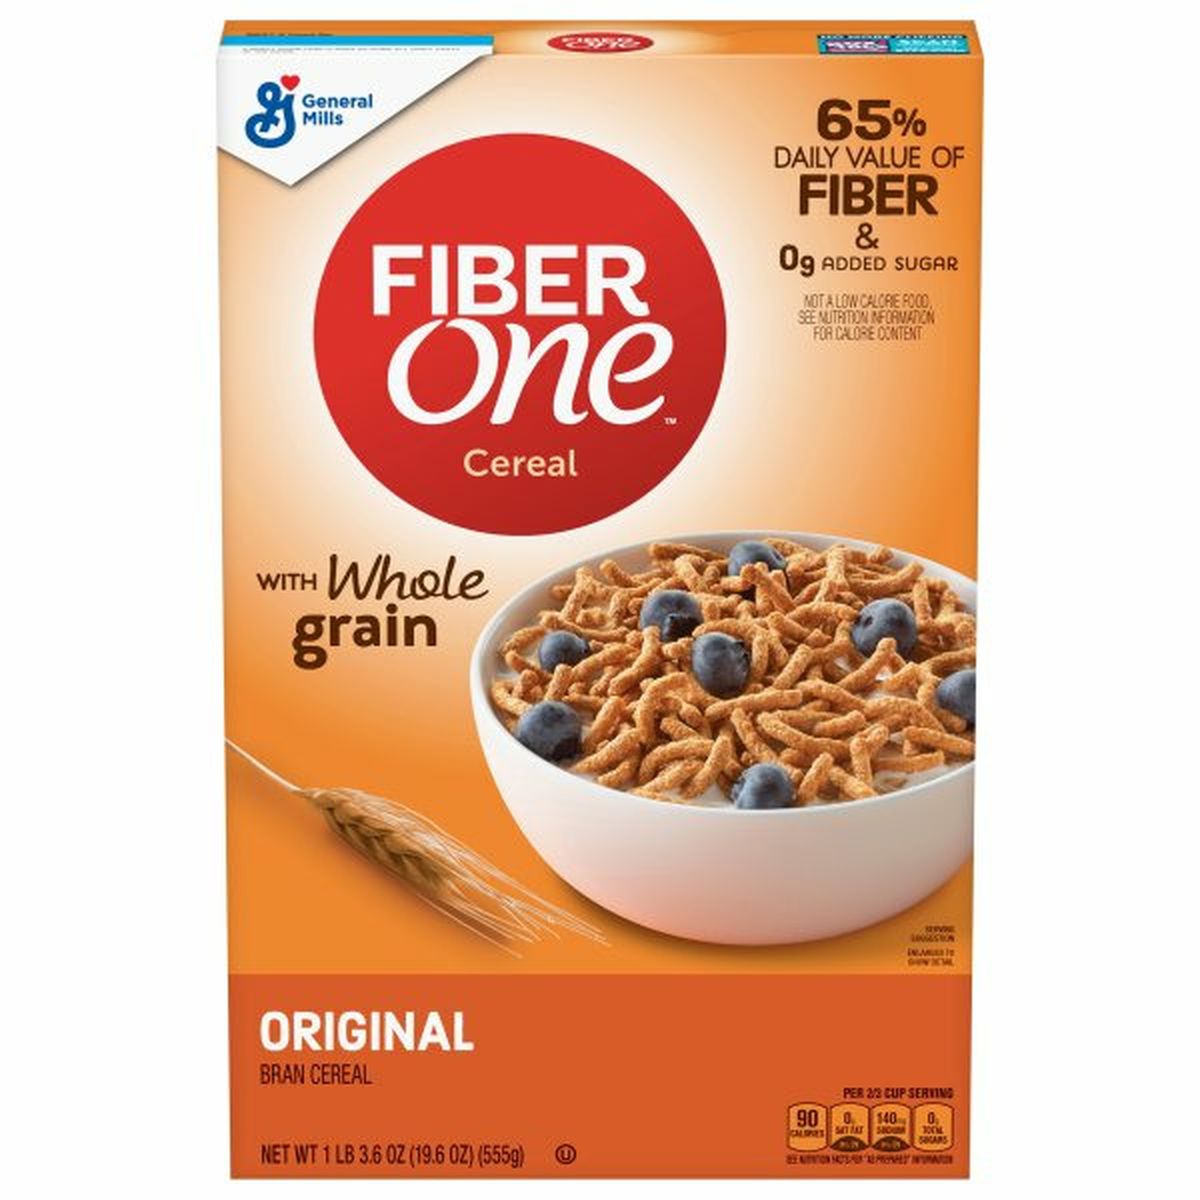 Calories in Fiber One Bran Cereal, with Whole Grain, Original